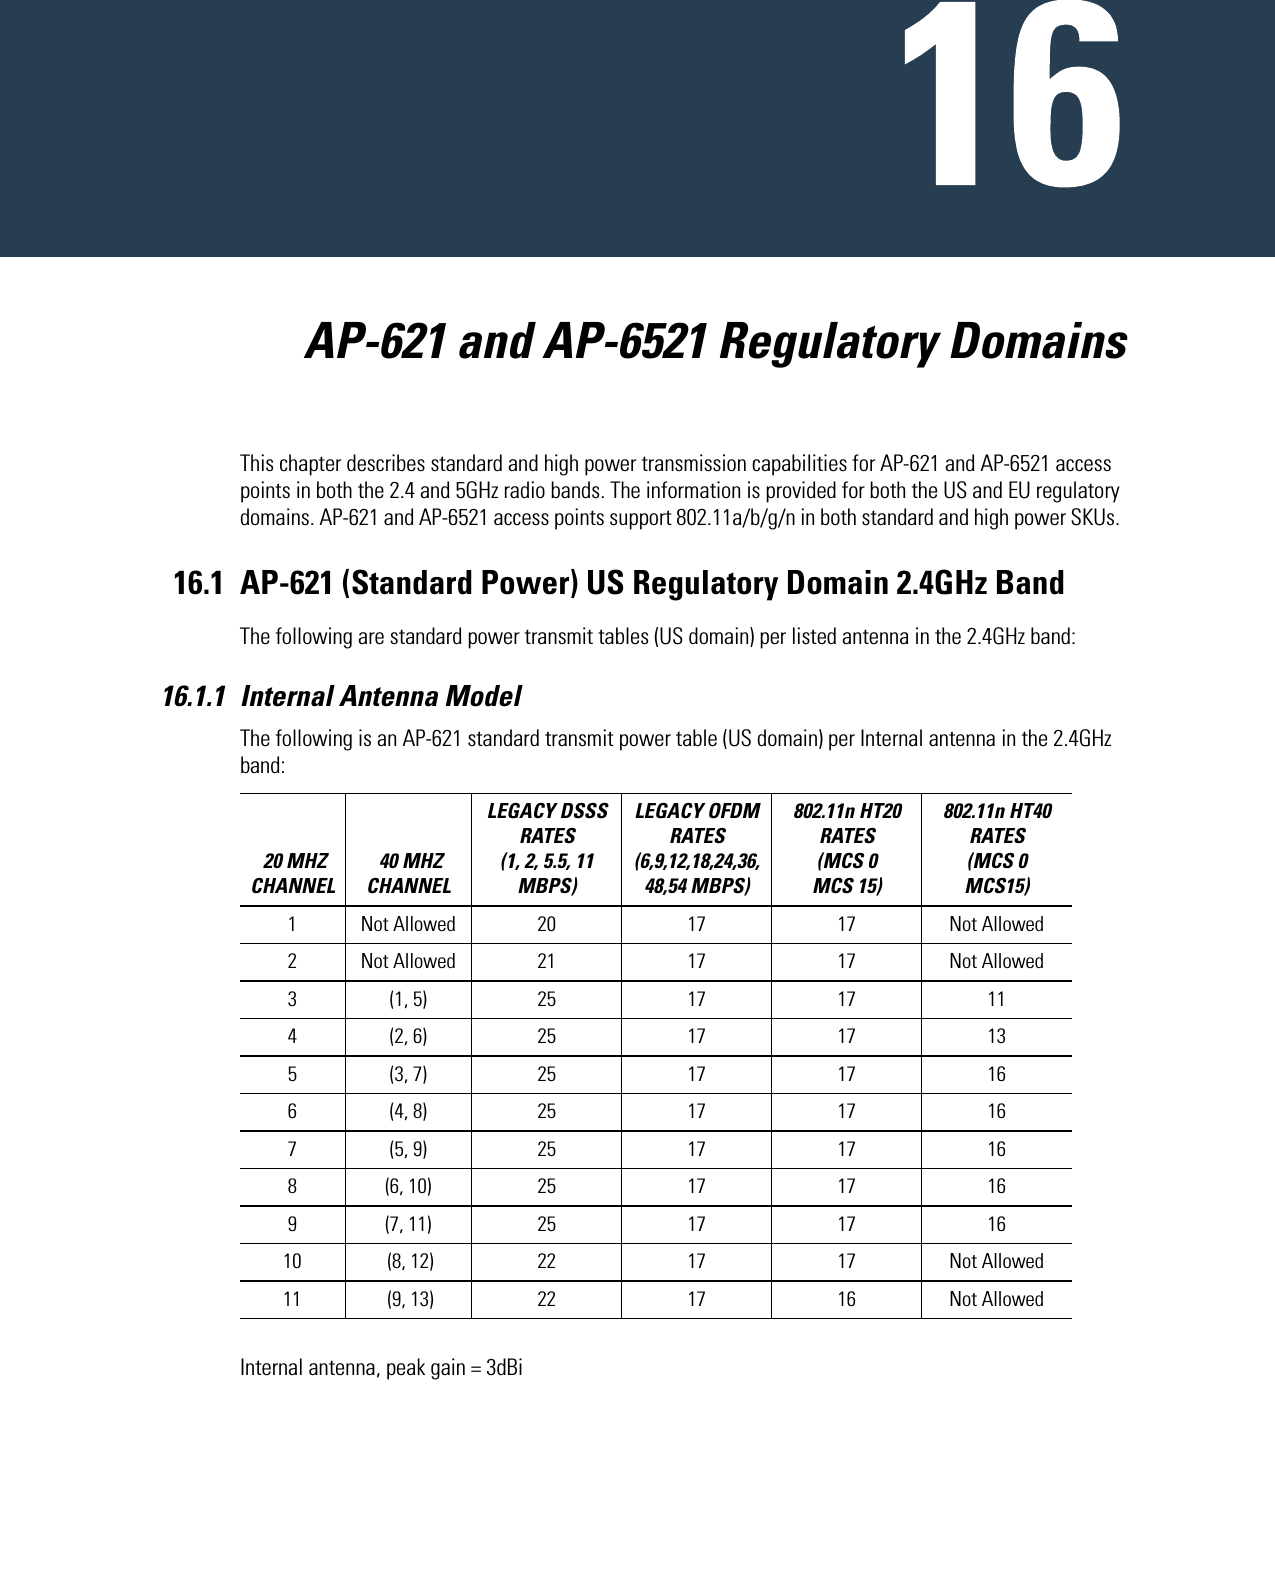           AP-621 and AP-6521 Regulatory DomainsThis chapter describes standard and high power transmission capabilities for AP-621 and AP-6521 access points in both the 2.4 and 5GHz radio bands. The information is provided for both the US and EU regulatory domains. AP-621 and AP-6521 access points support 802.11a/b/g/n in both standard and high power SKUs. 16.1 AP-621 (Standard Power) US Regulatory Domain 2.4GHz BandThe following are standard power transmit tables (US domain) per listed antenna in the 2.4GHz band:16.1.1 Internal Antenna Model The following is an AP-621 standard transmit power table (US domain) per Internal antenna in the 2.4GHz band:Internal antenna, peak gain = 3dBi 20 MHZ CHANNEL 40 MHZ CHANNELLEGACY DSSS RATES (1, 2, 5.5, 11 MBPS) LEGACY OFDM RATES (6,9,12,18,24,36,48,54 MBPS) 802.11n HT20 RATES (MCS 0   MCS 15)802.11n HT40 RATES (MCS 0   MCS15) 1 Not Allowed 20 17 17 Not Allowed2 Not Allowed 21 17 17 Not Allowed3 (1, 5) 25 17 17 114 (2, 6) 25 17 17 135 (3, 7) 25 17 17 166 (4, 8) 25 17 17 167 (5, 9) 25 17 17 168 (6, 10) 25 17 17 169 (7, 11) 25 17 17 1610  (8, 12) 22 17 17 Not Allowed11  (9, 13) 22 17 16 Not Allowed